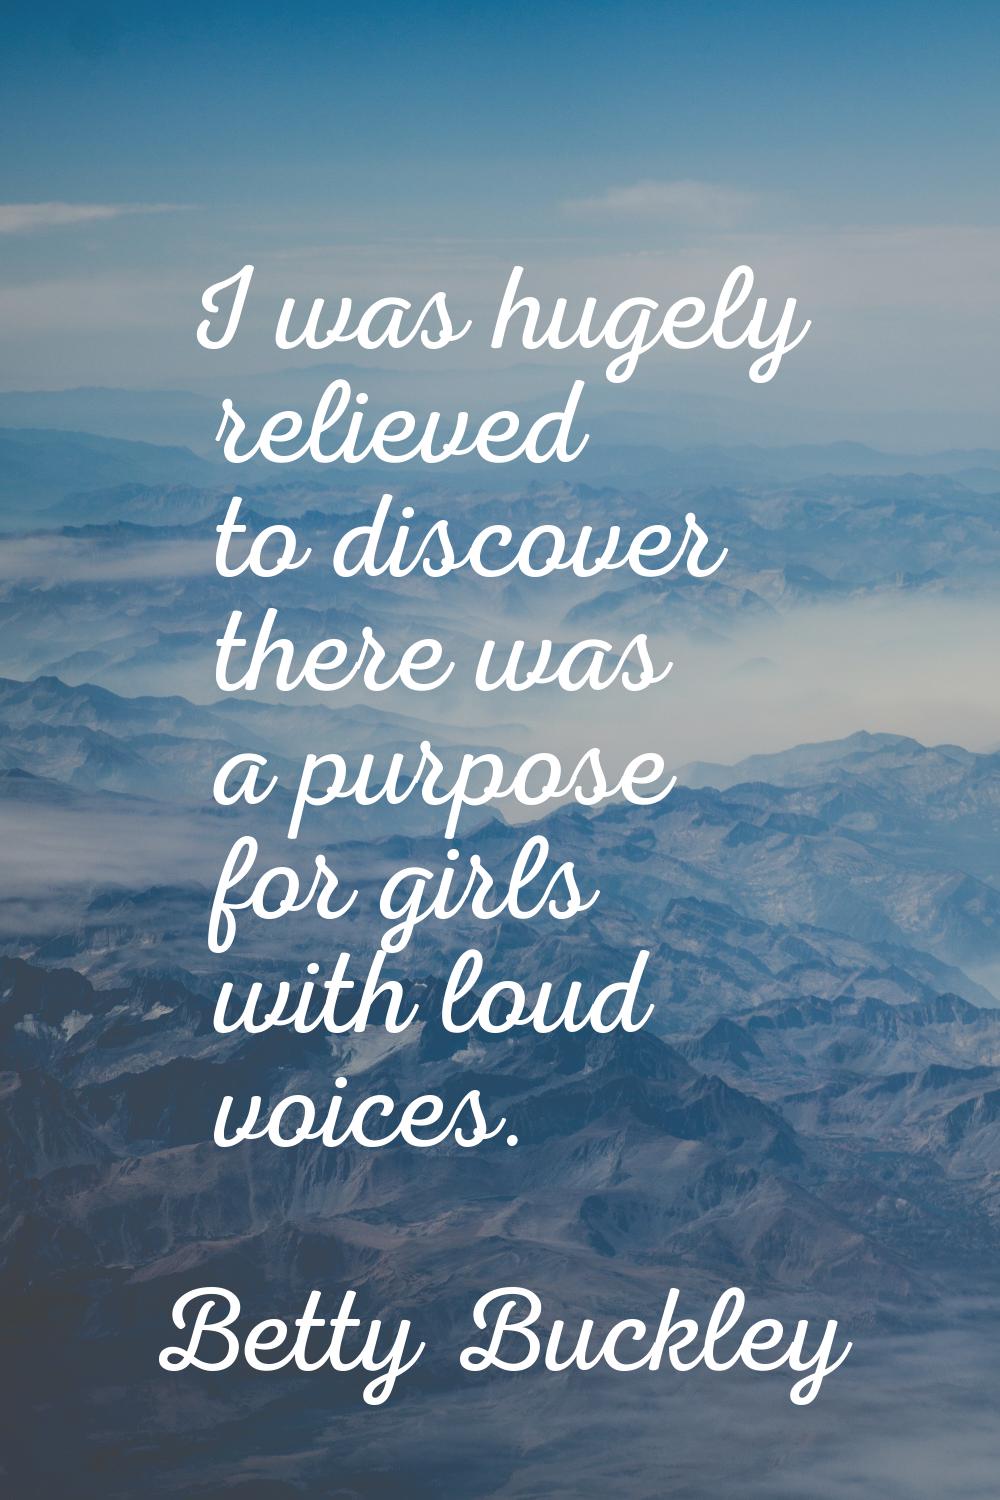 I was hugely relieved to discover there was a purpose for girls with loud voices.